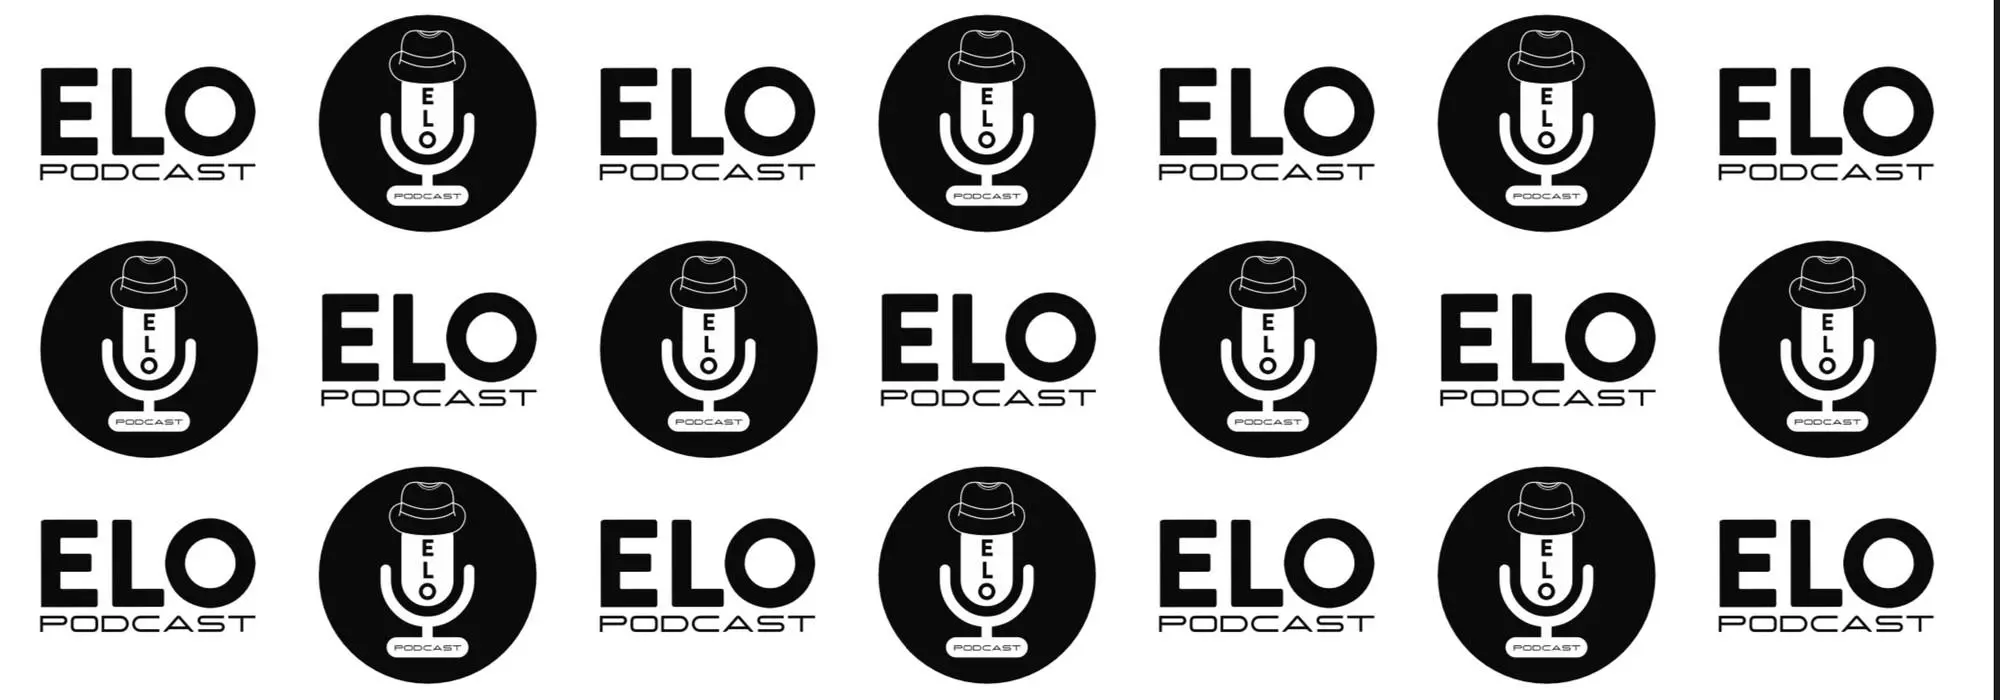 elopodcast profile